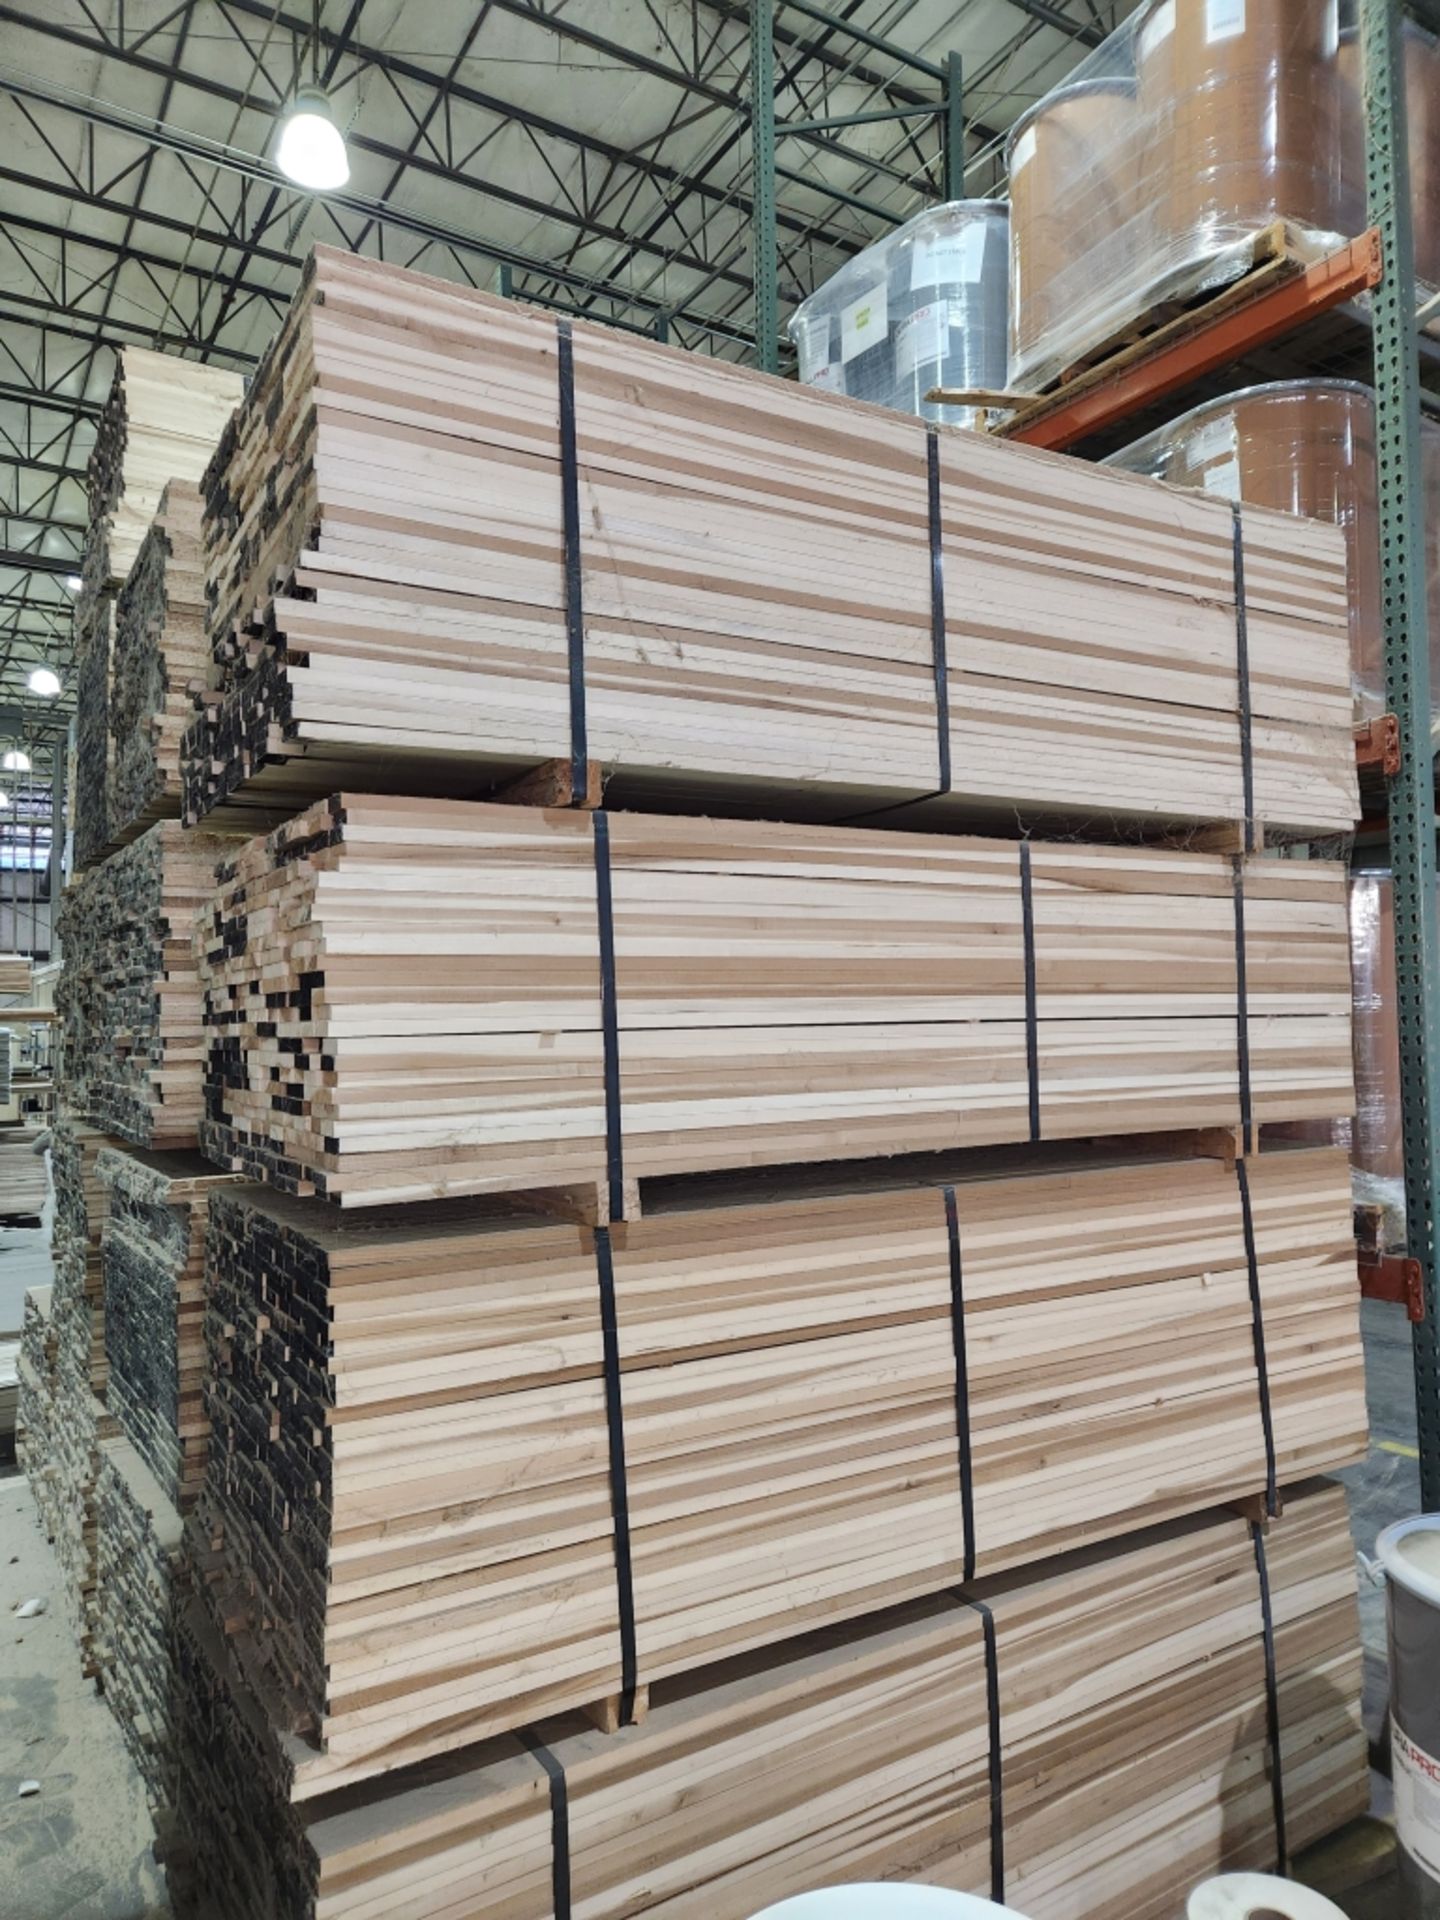 Poplar lumber - approximately 1190 board feet on (17) pallets: (4035) pcs of 4/4 x 2" x 8', (1170) p - Image 3 of 3